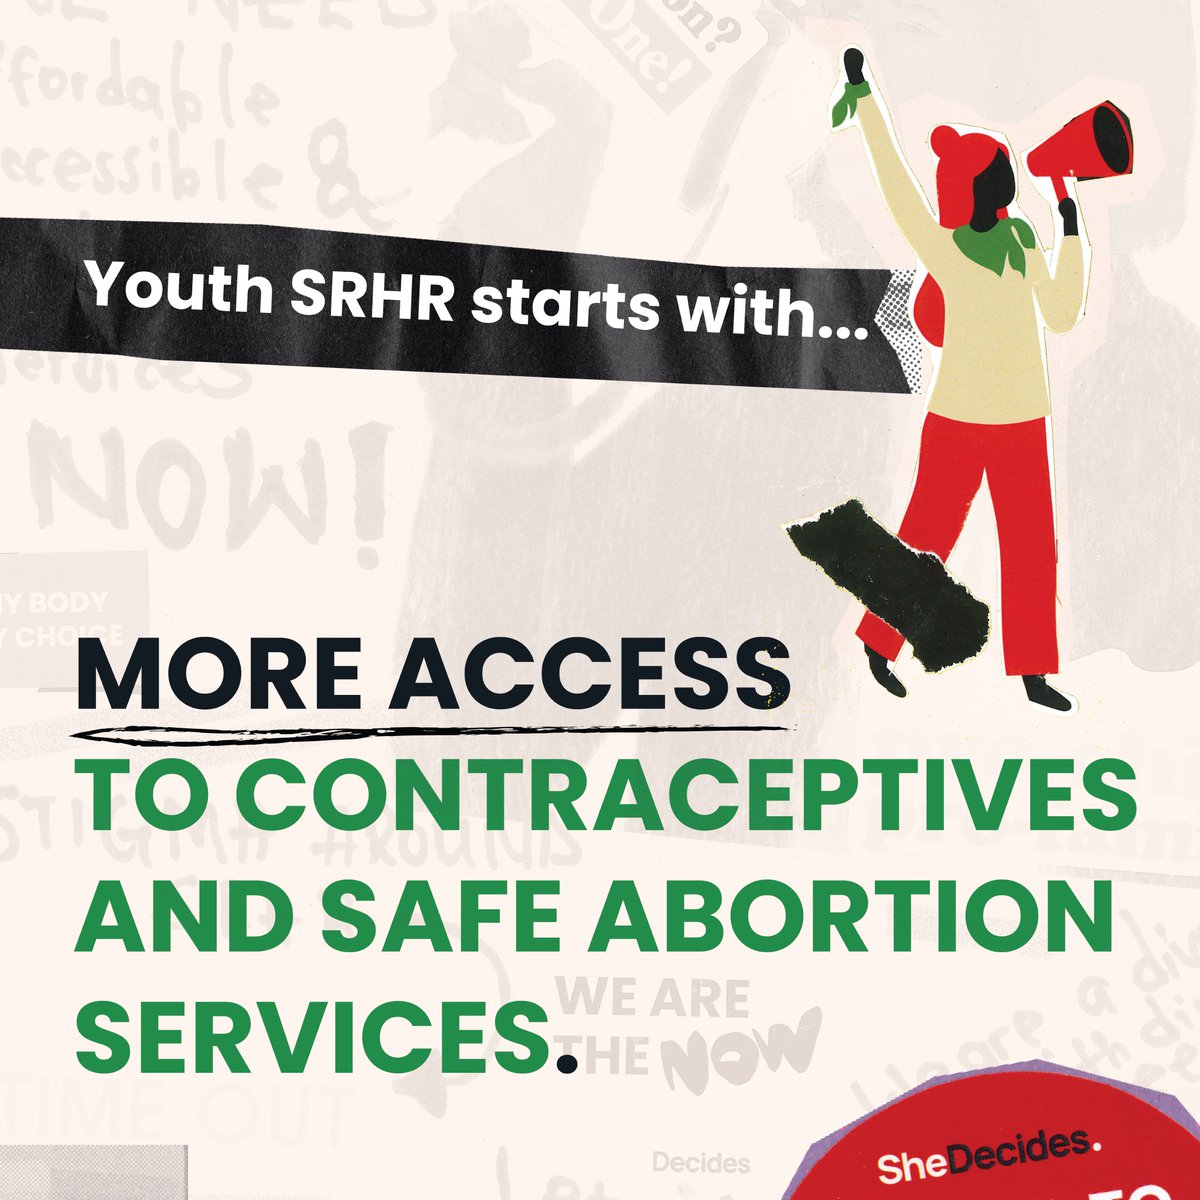 #YouthSRHRStartsWith access to contraception & safe abortion services! In our zine, young people identify better access to contraception & safe abortion services as critical aspects of #youth #SRHR. Take a look and share our zine🔎shedecides.com/youthsrhr #YouthDecides #CPD57